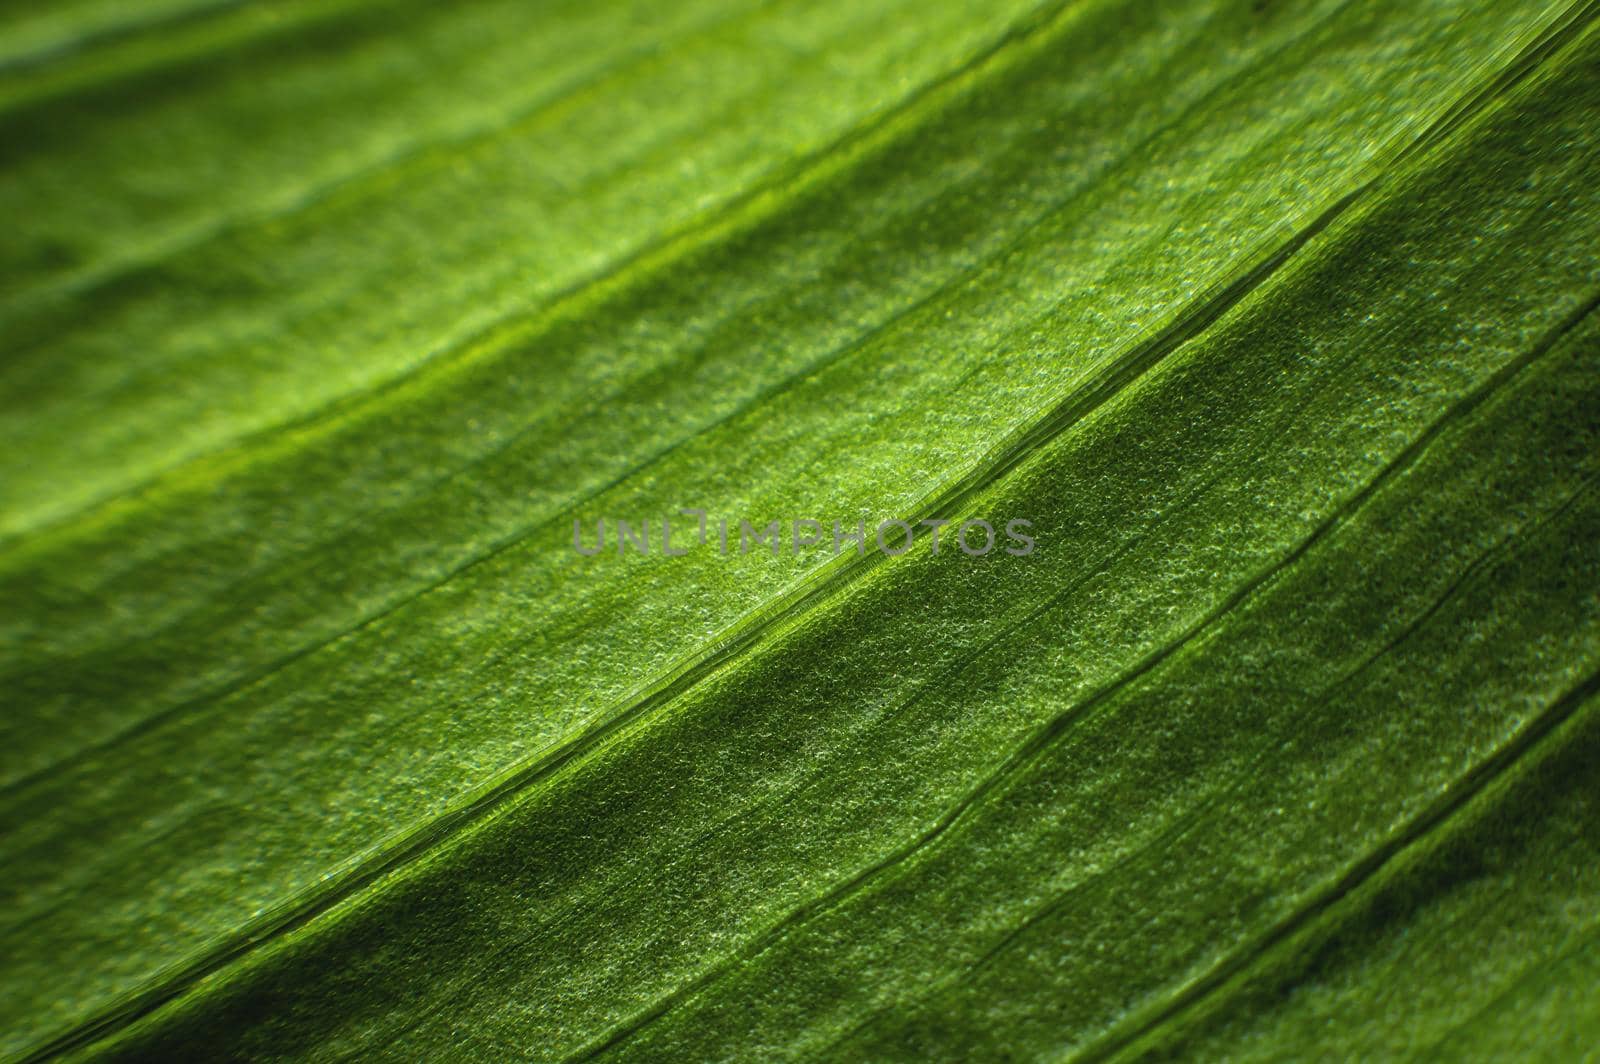 A close-up of a green leaf of a plant in macro photography showing the cells and structure of the green plant. Selective focus batanic background.